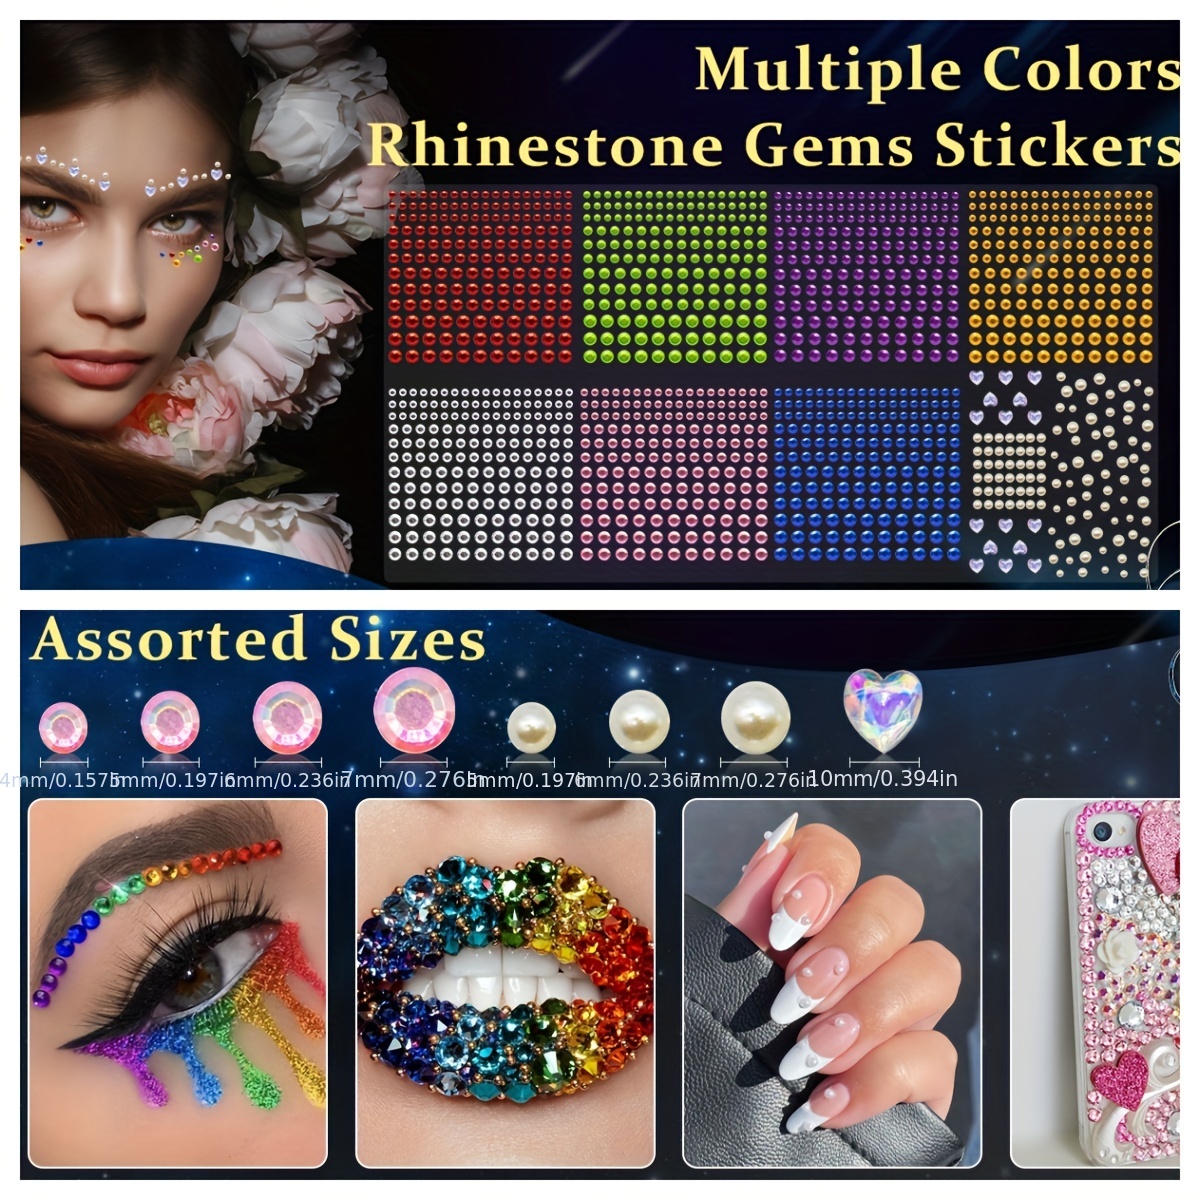 Face Gems Self Adhesive Face Rhinestones for Makeup Festival Face Jewels,  Stick On Rhinestones Hair Gems, Rhinestones Stickers for Makeup, Face,  Hair